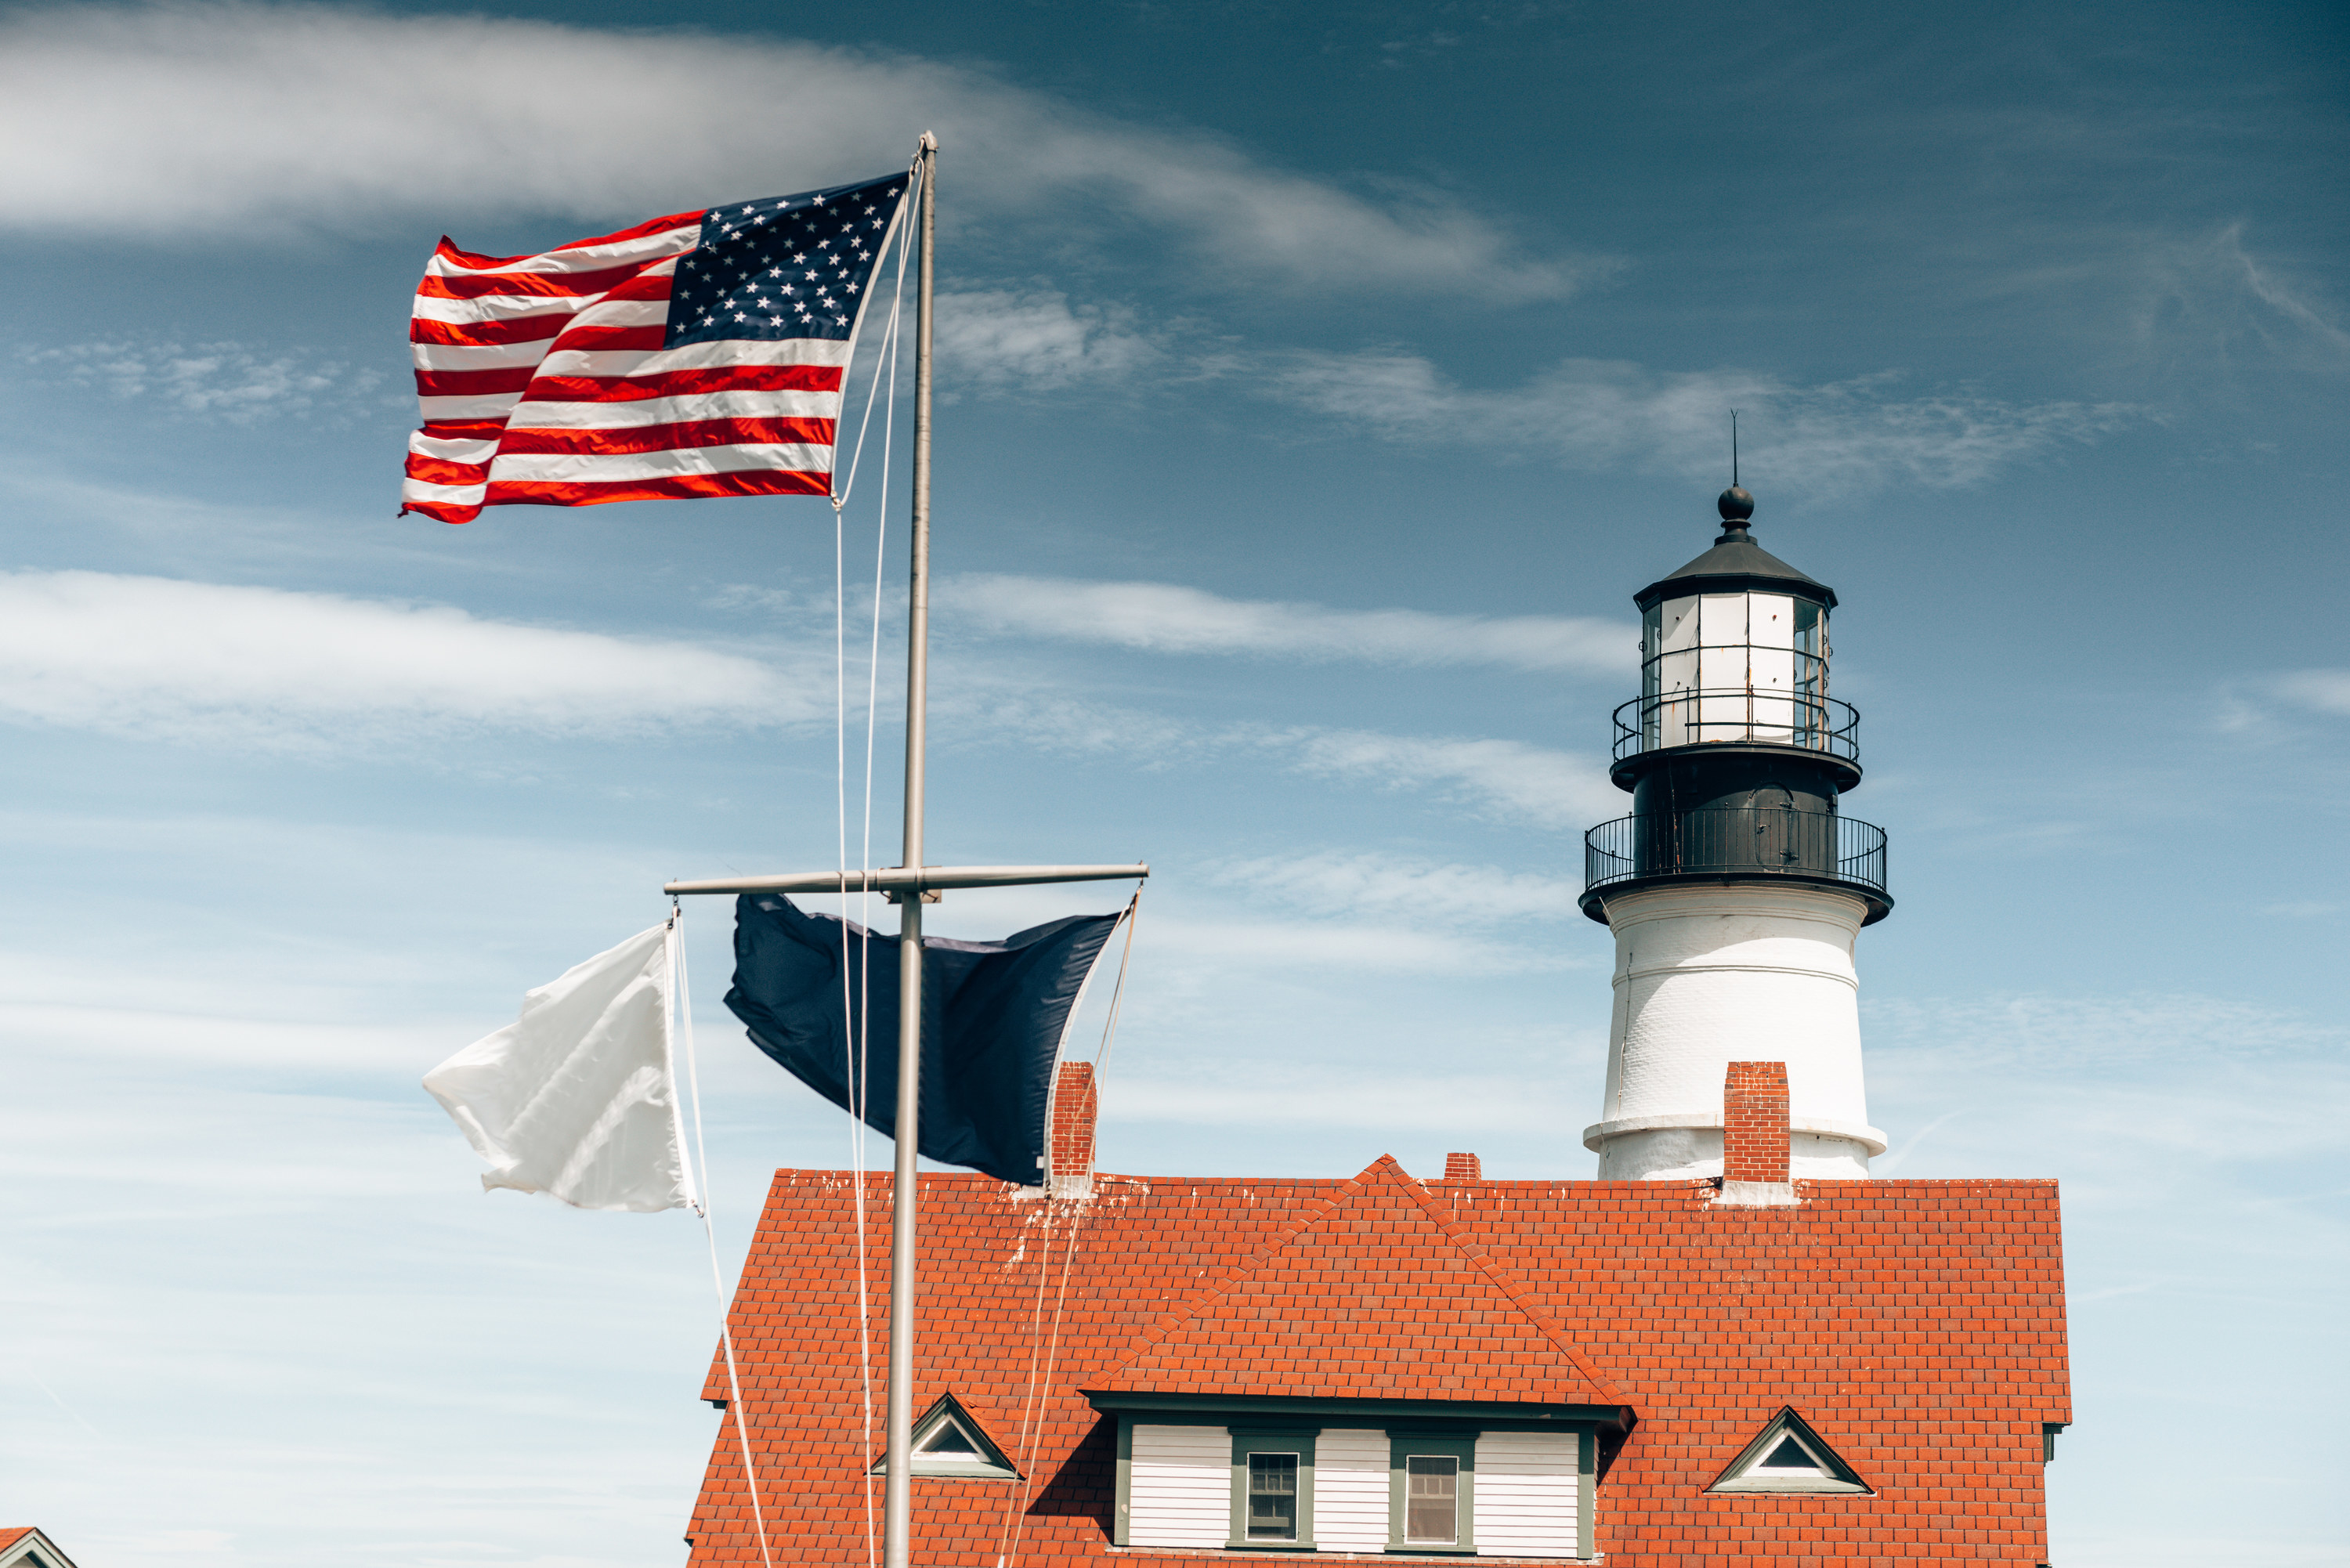 A lighthouse with a flying American flag